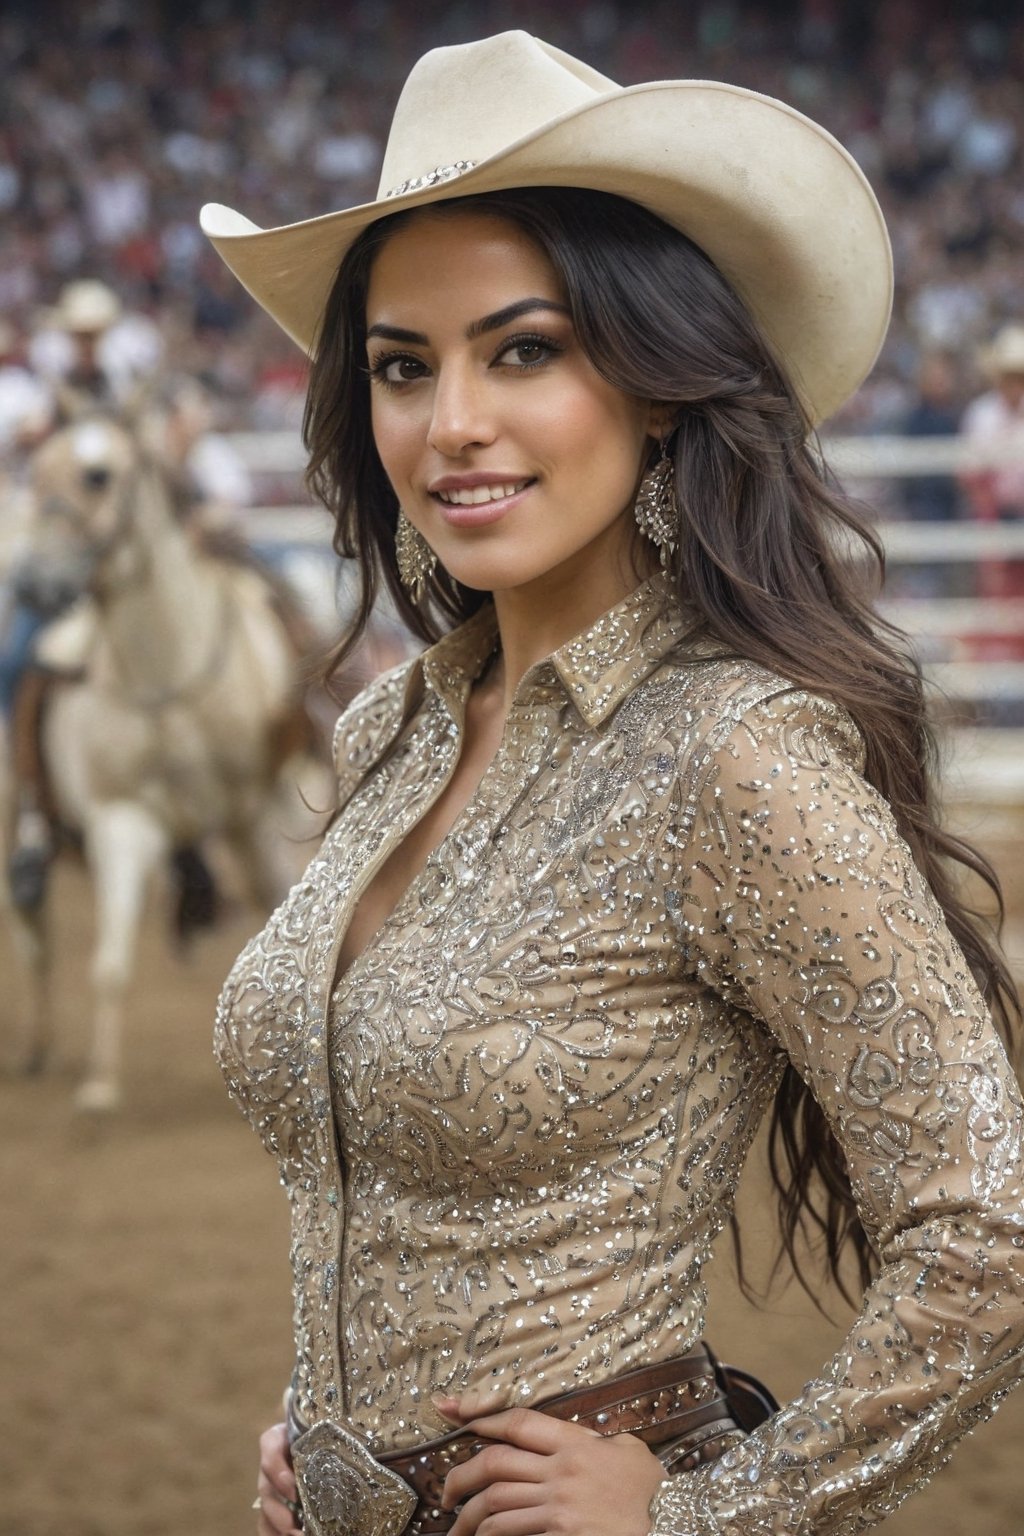 Generate hyper realistic image of  Persian woman in glamorous rodeo attire, wearing a bedazzled cowgirl hat and stylish rodeo queen outfit, her eyes reflecting the excitement of a bustling rodeo arena. upper body shot,Extremely Realistic